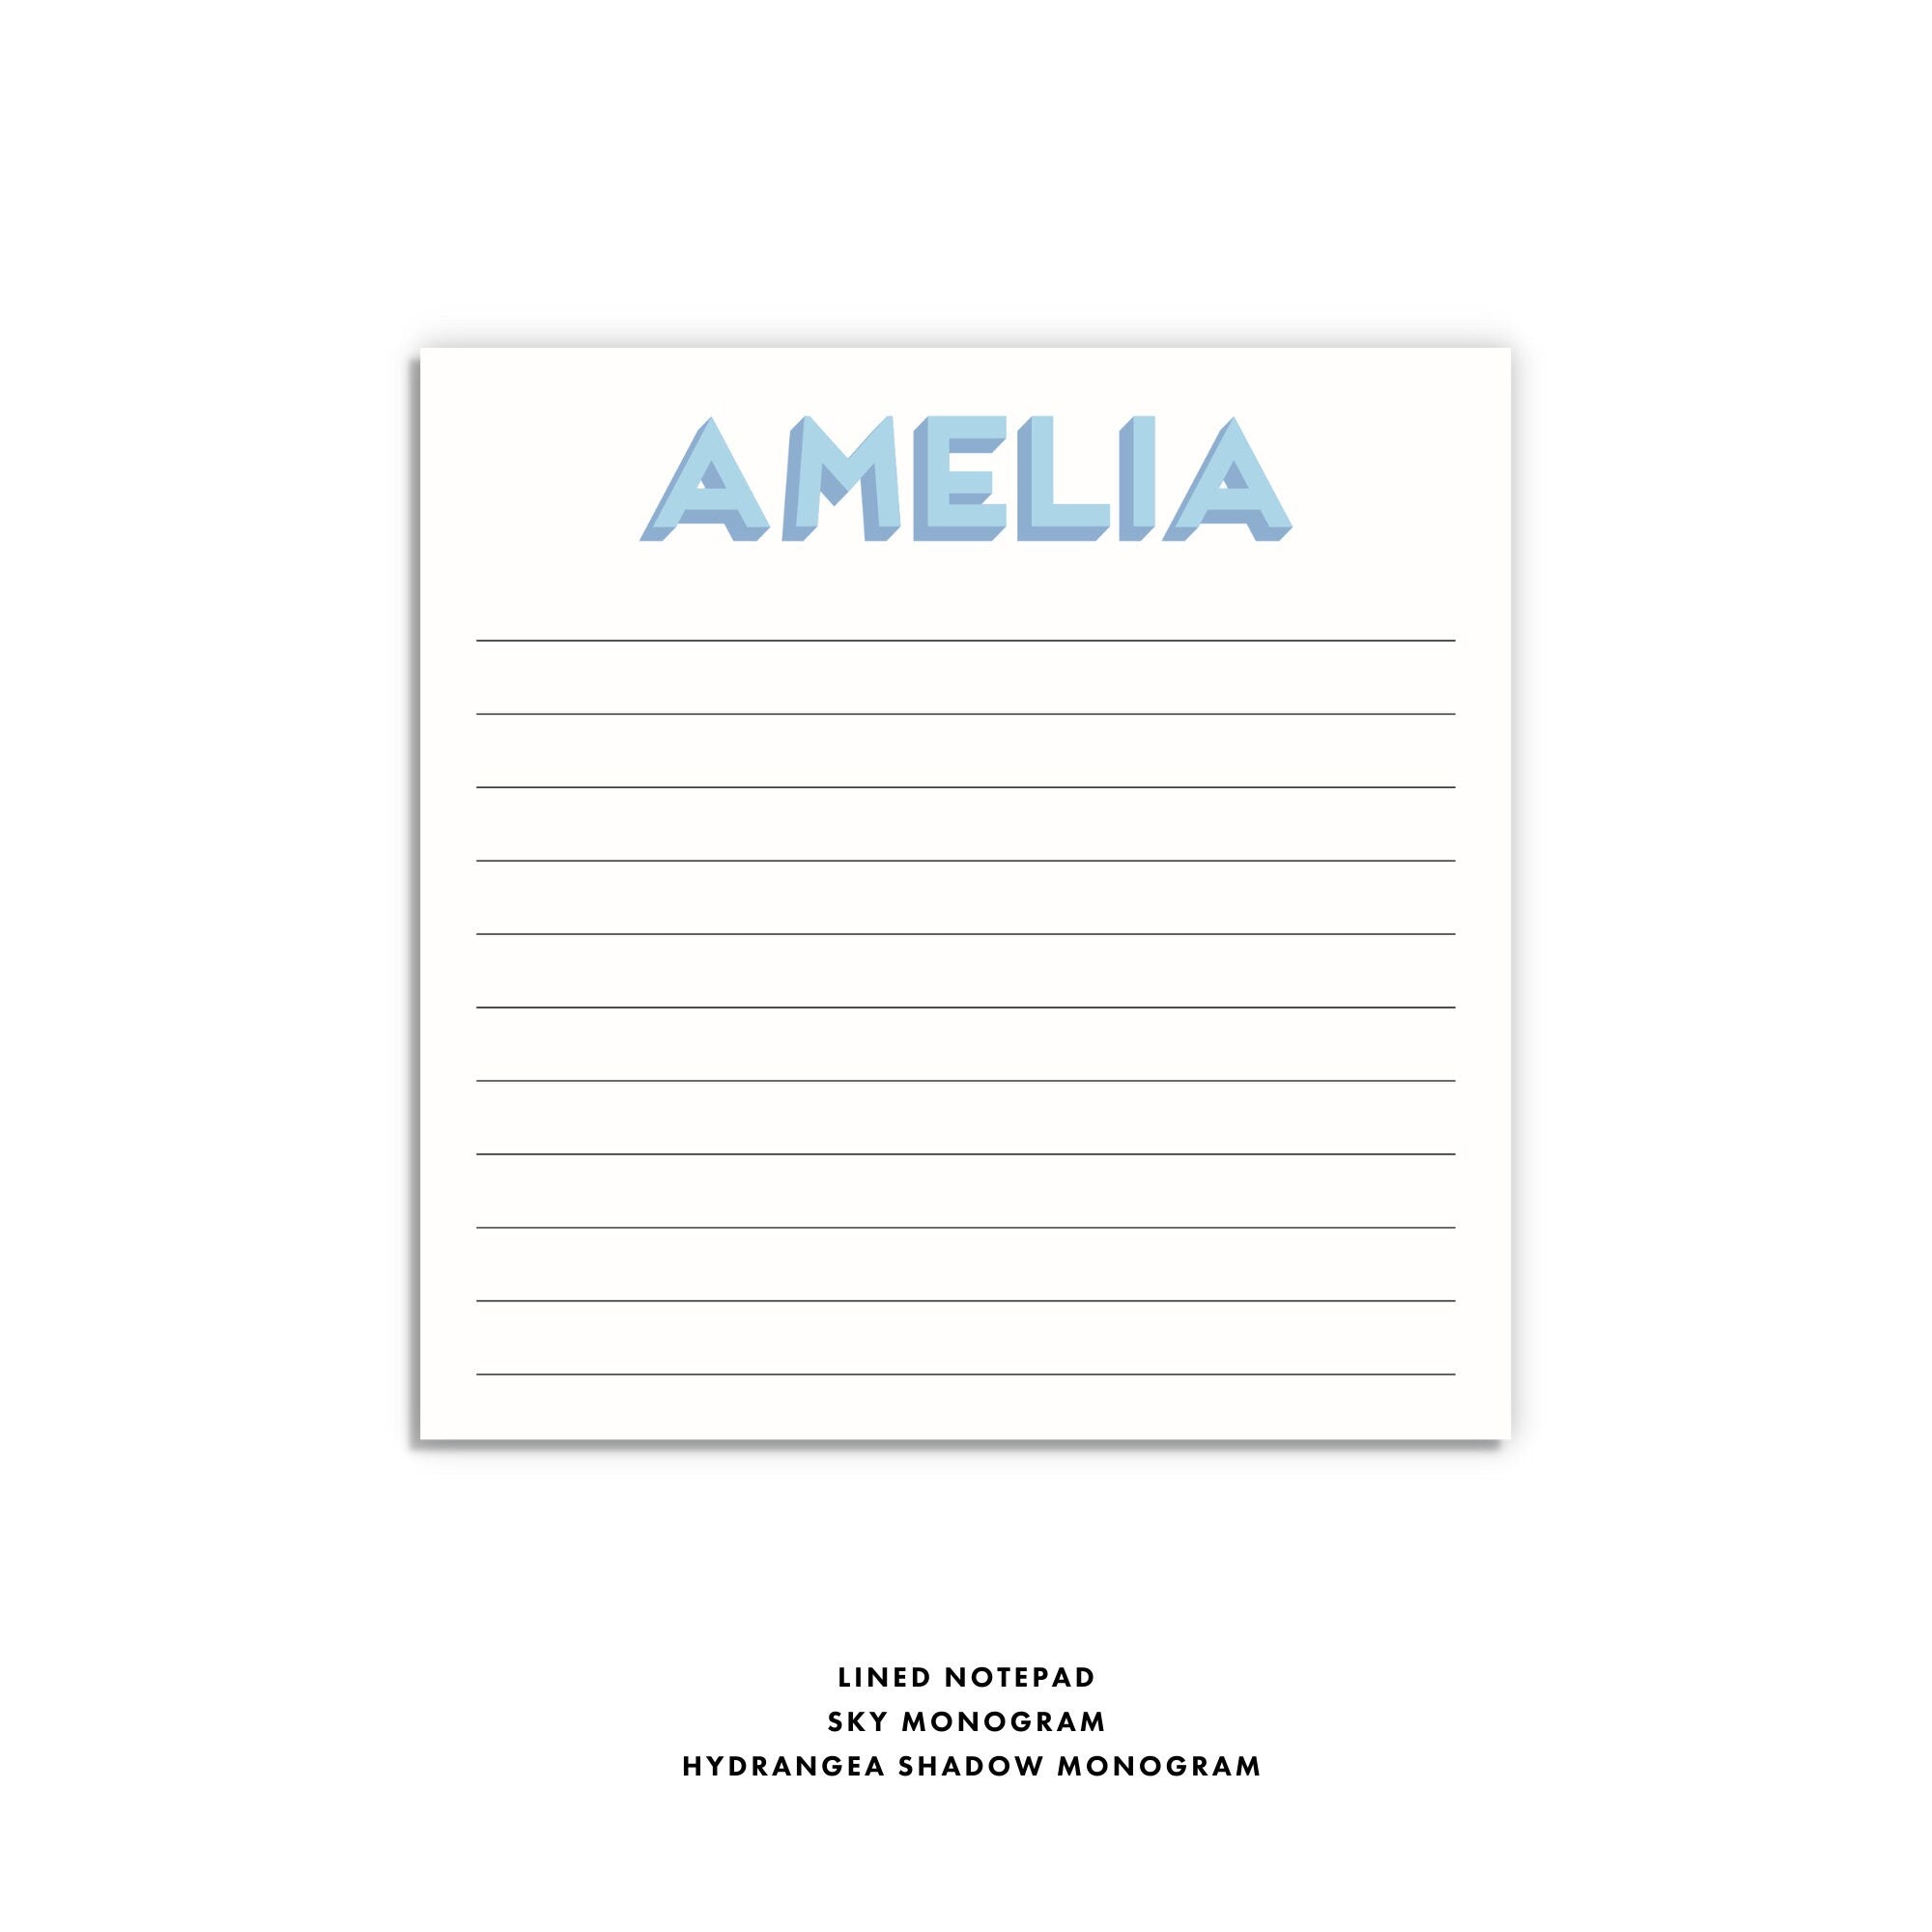 personalized name notepad, lined notepad, monogram stationary / stationary, teacher gift, to do list, grad gift, colorful stationery